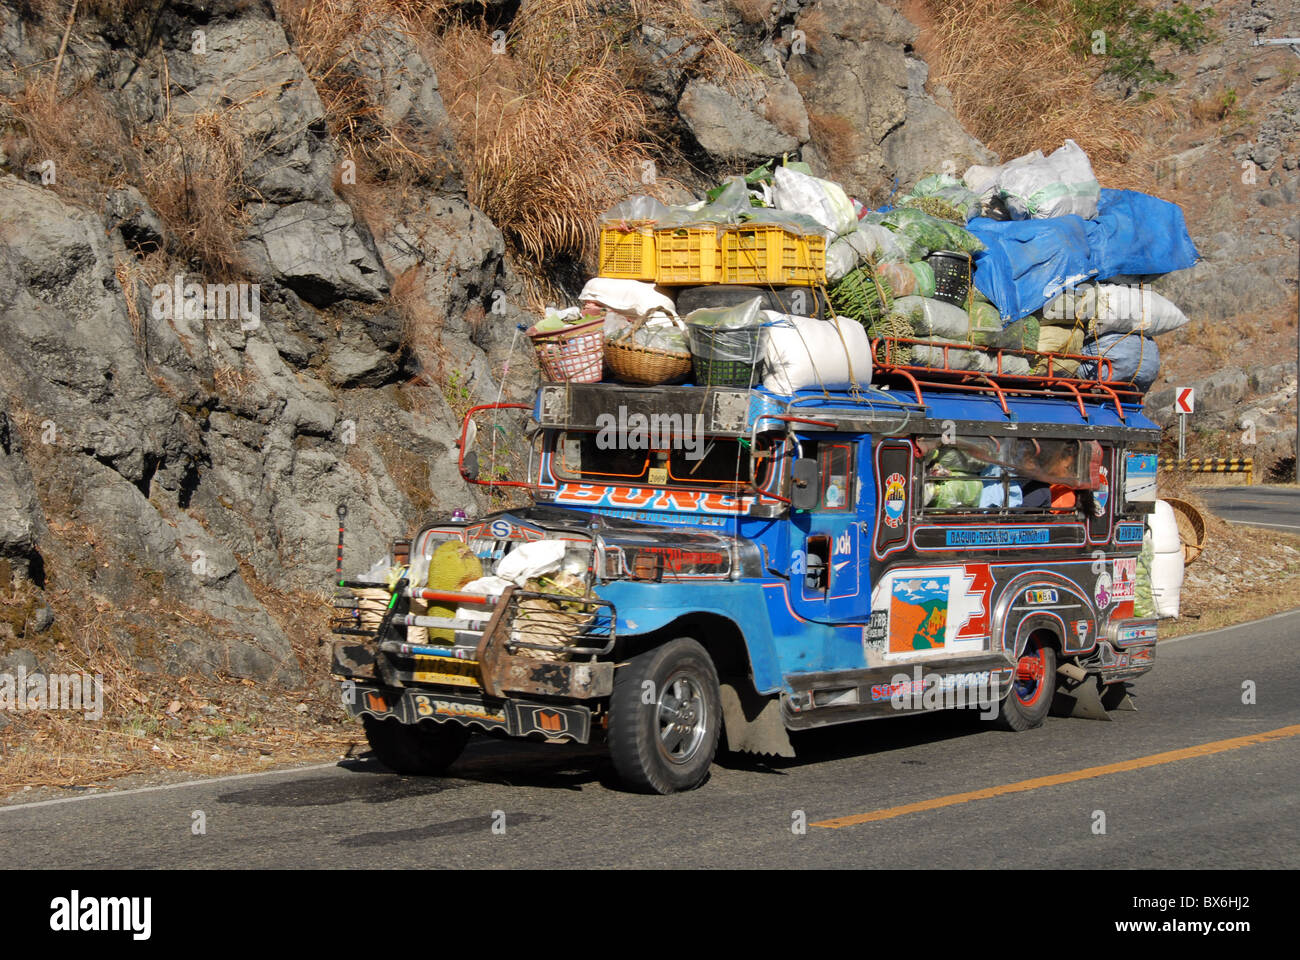 Heavily loaded jeepney, a typical local bus, on Kennon Road, Rosario-Baguio, Cordillera, Luzon, Philippines Stock Photo